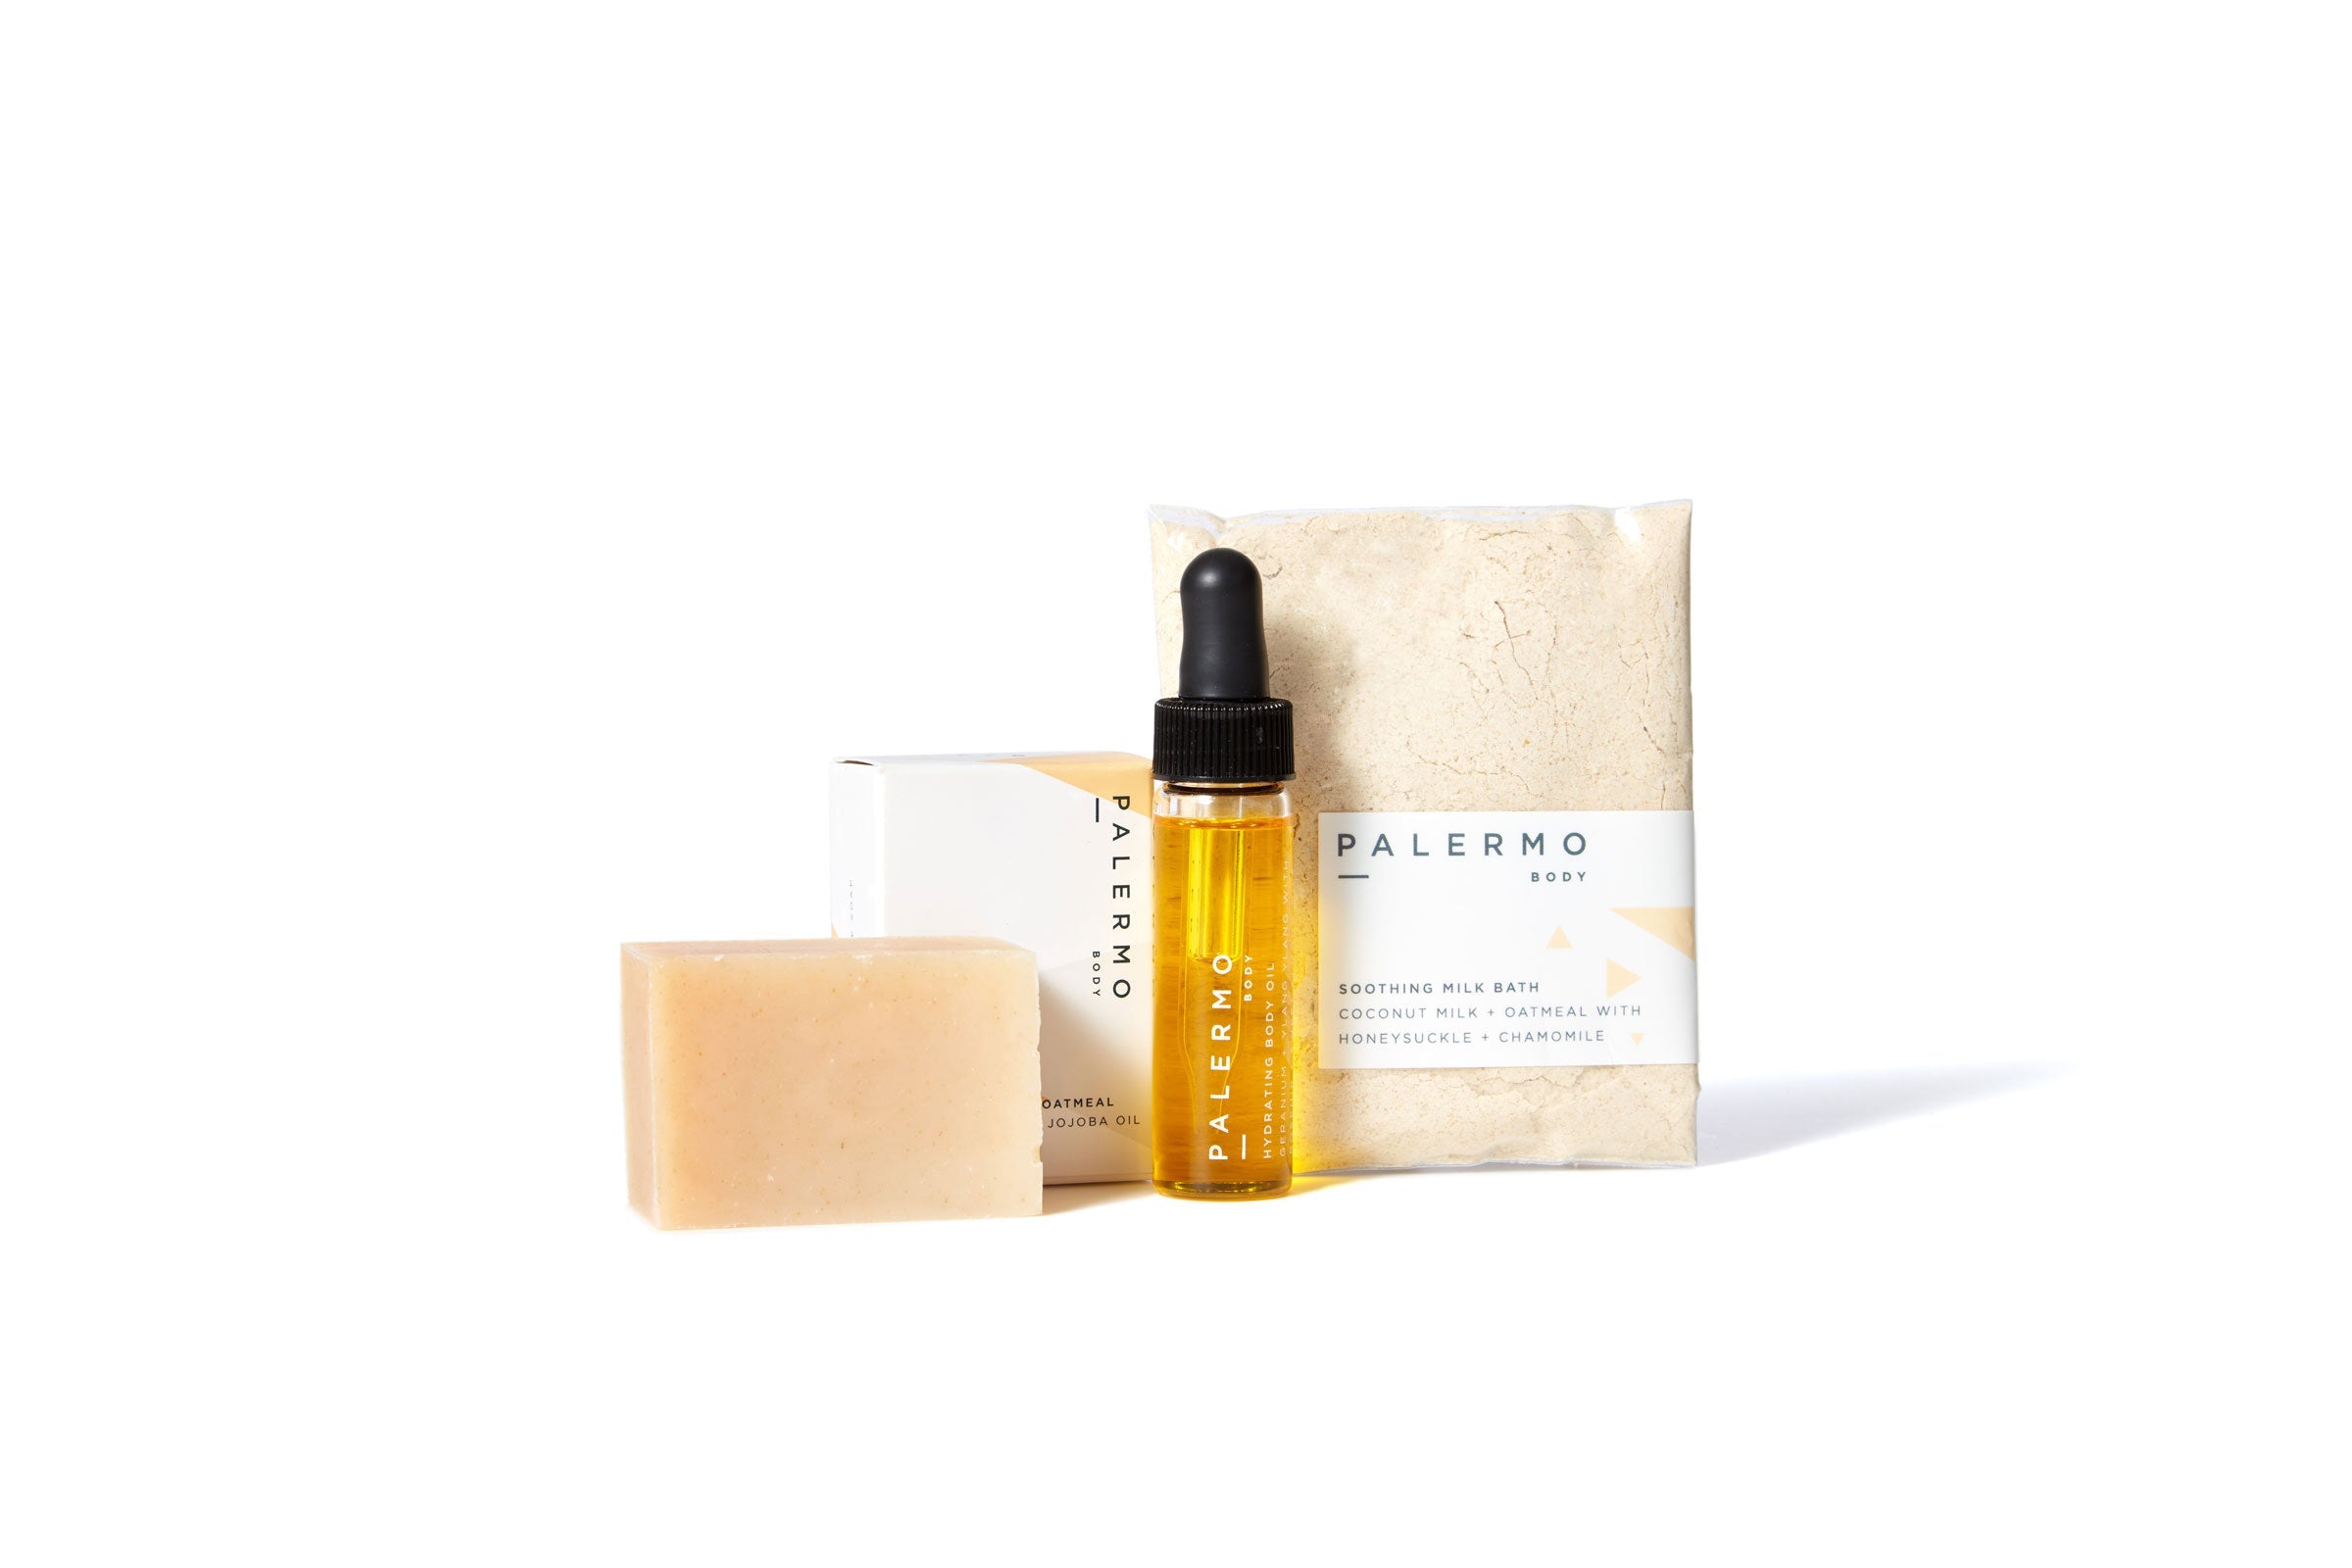  Soothe + Hydrate Mindful Kit by Palermo Body Palermo Body Perfumarie